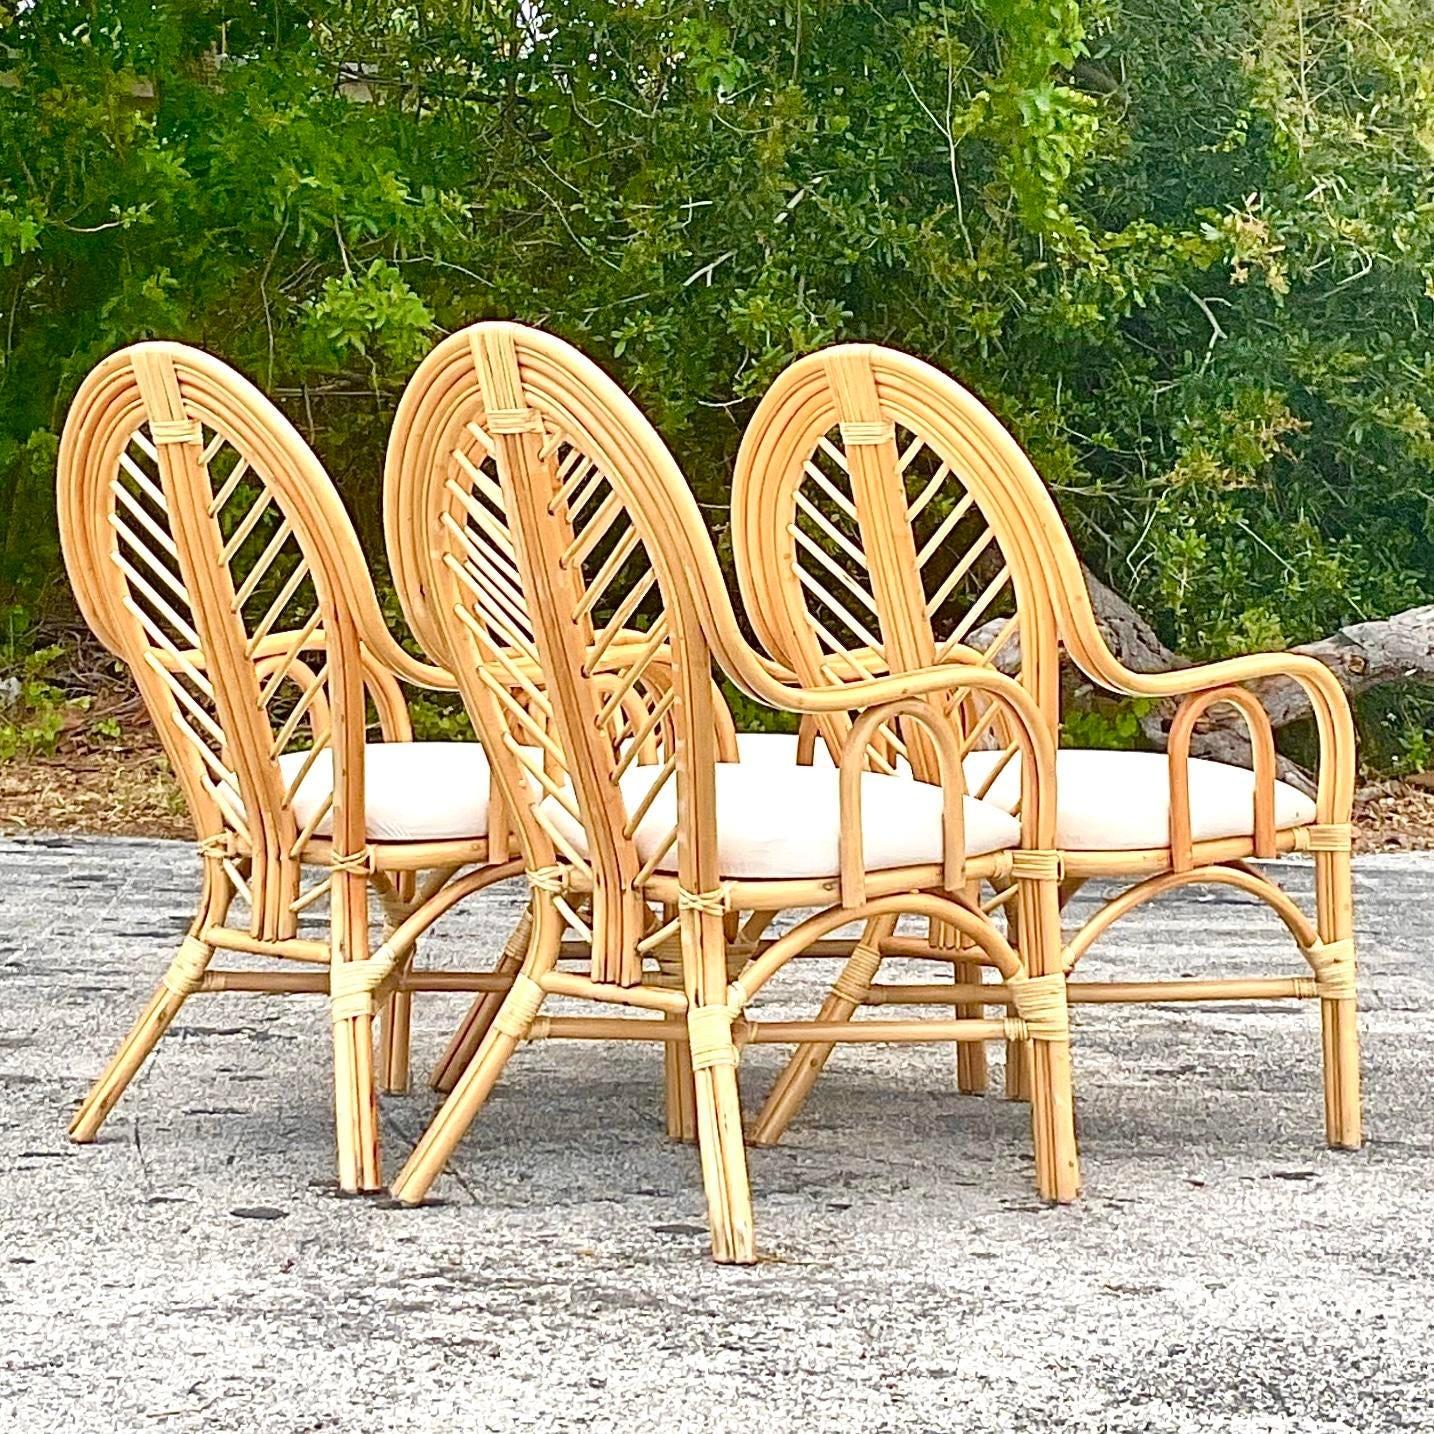 Elevate your dining experience with this set of 4 Vintage Coastal Bent Rattan Dining Chairs. Perfectly embodying American style, these chairs blend natural elegance with coastal charm, offering both comfort and timeless appeal. Ideal for creating a